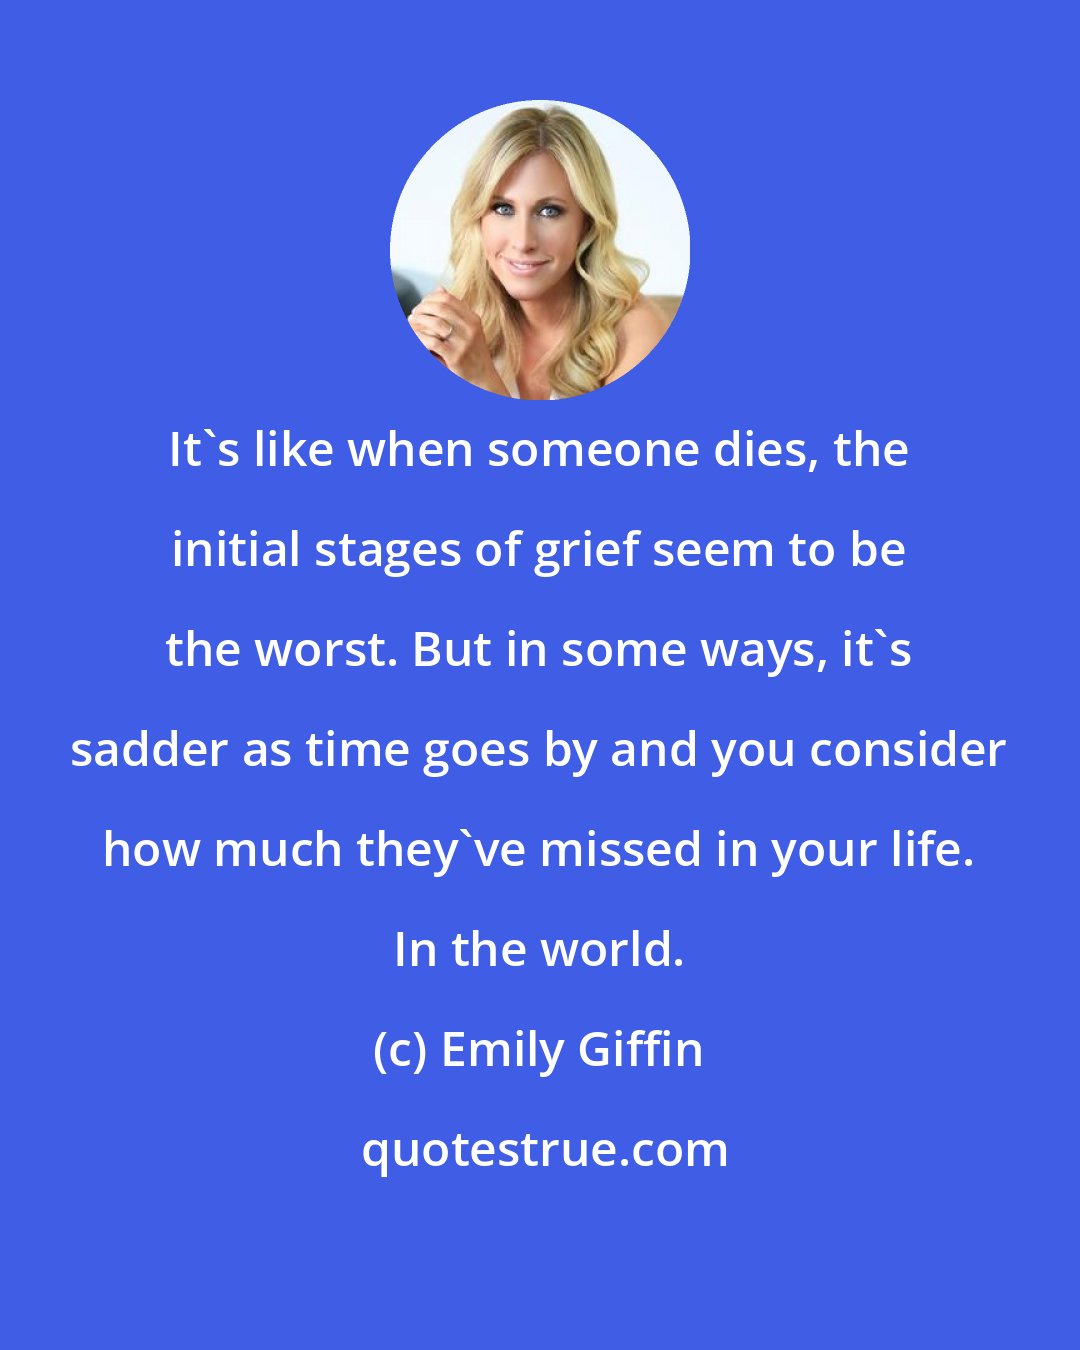 Emily Giffin: It's like when someone dies, the initial stages of grief seem to be the worst. But in some ways, it's sadder as time goes by and you consider how much they've missed in your life. In the world.